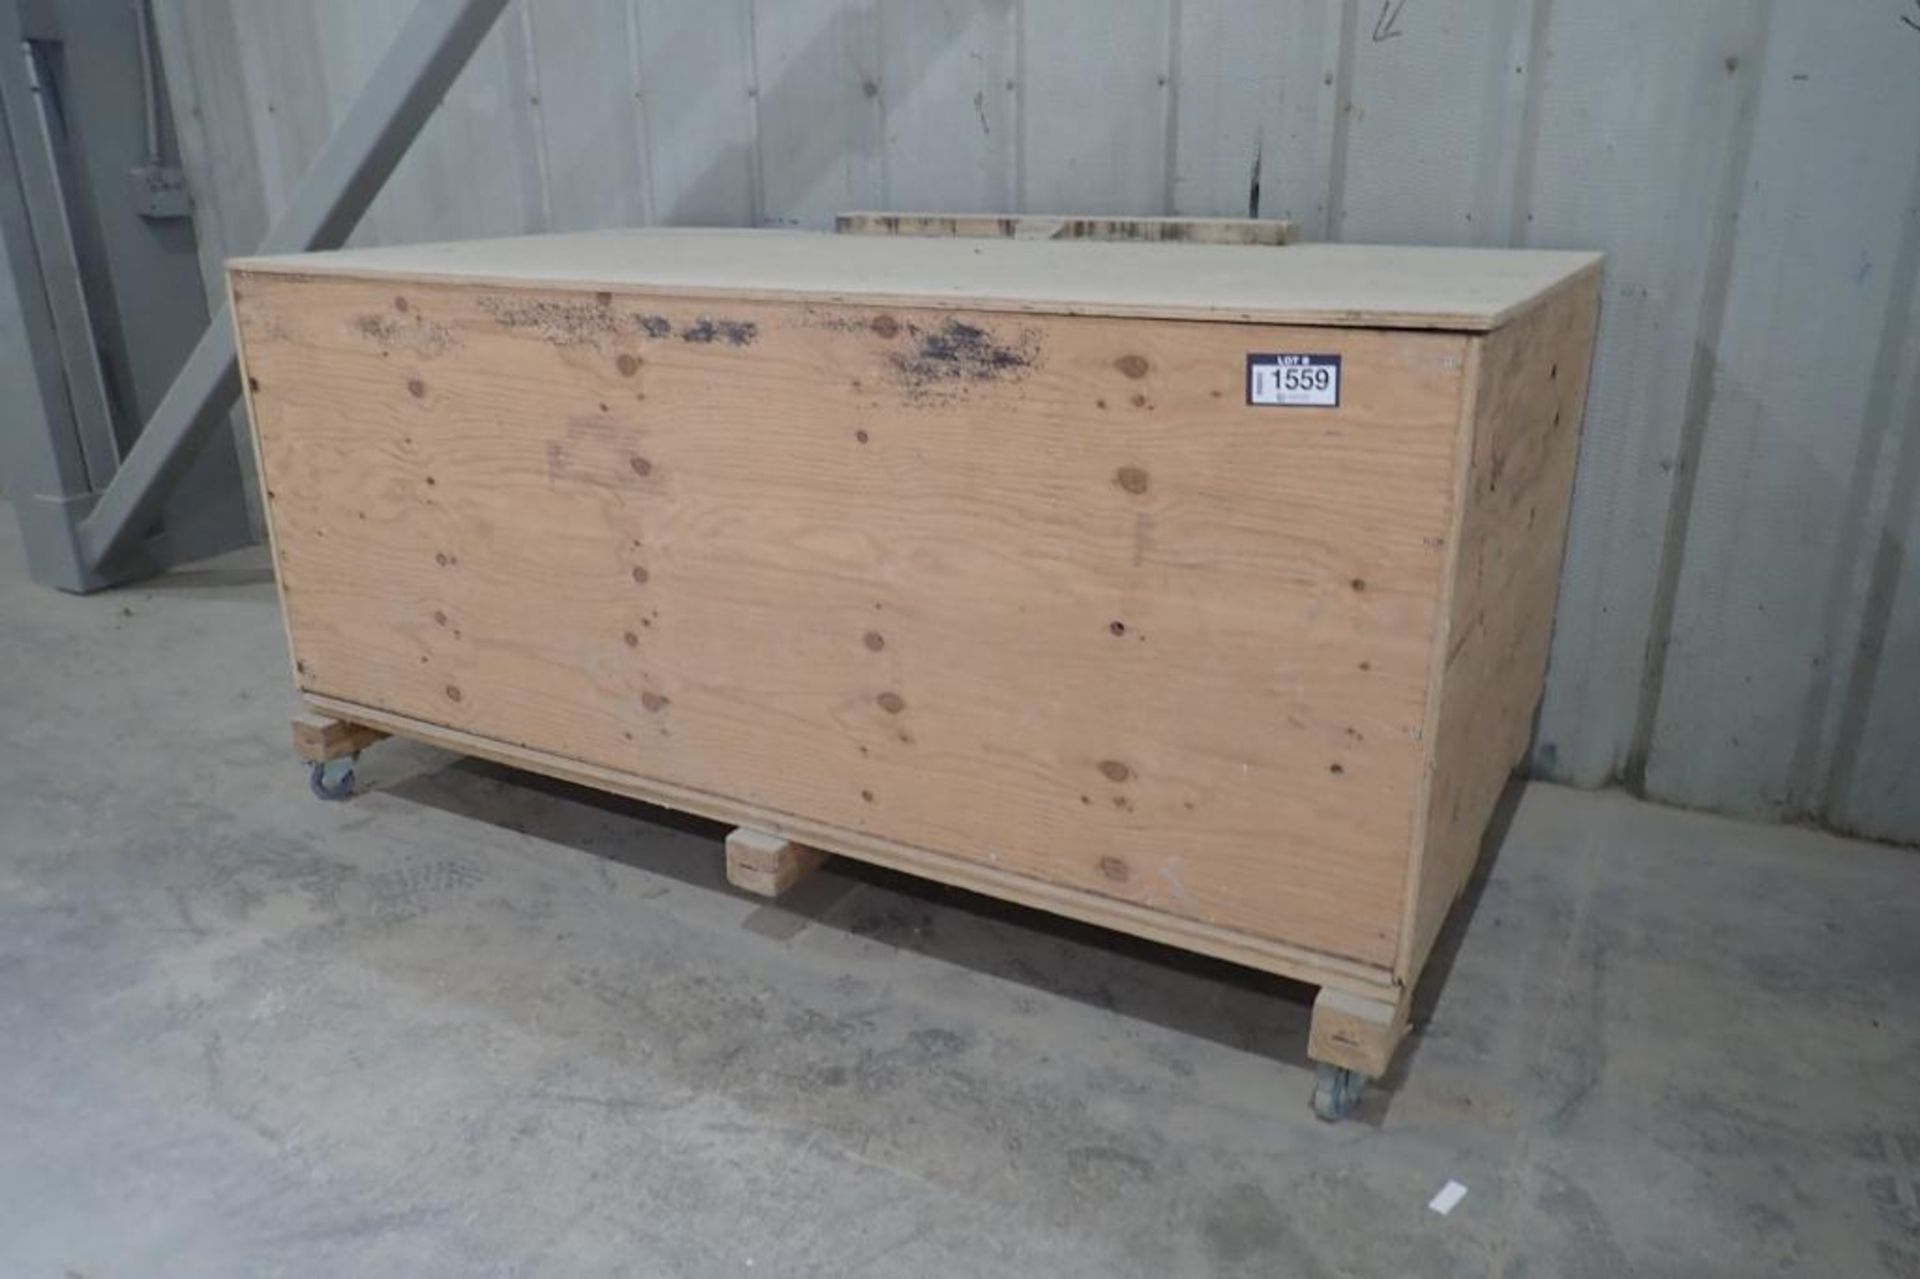 Mobile Wooden 42"x72" Storage Box and Contents.